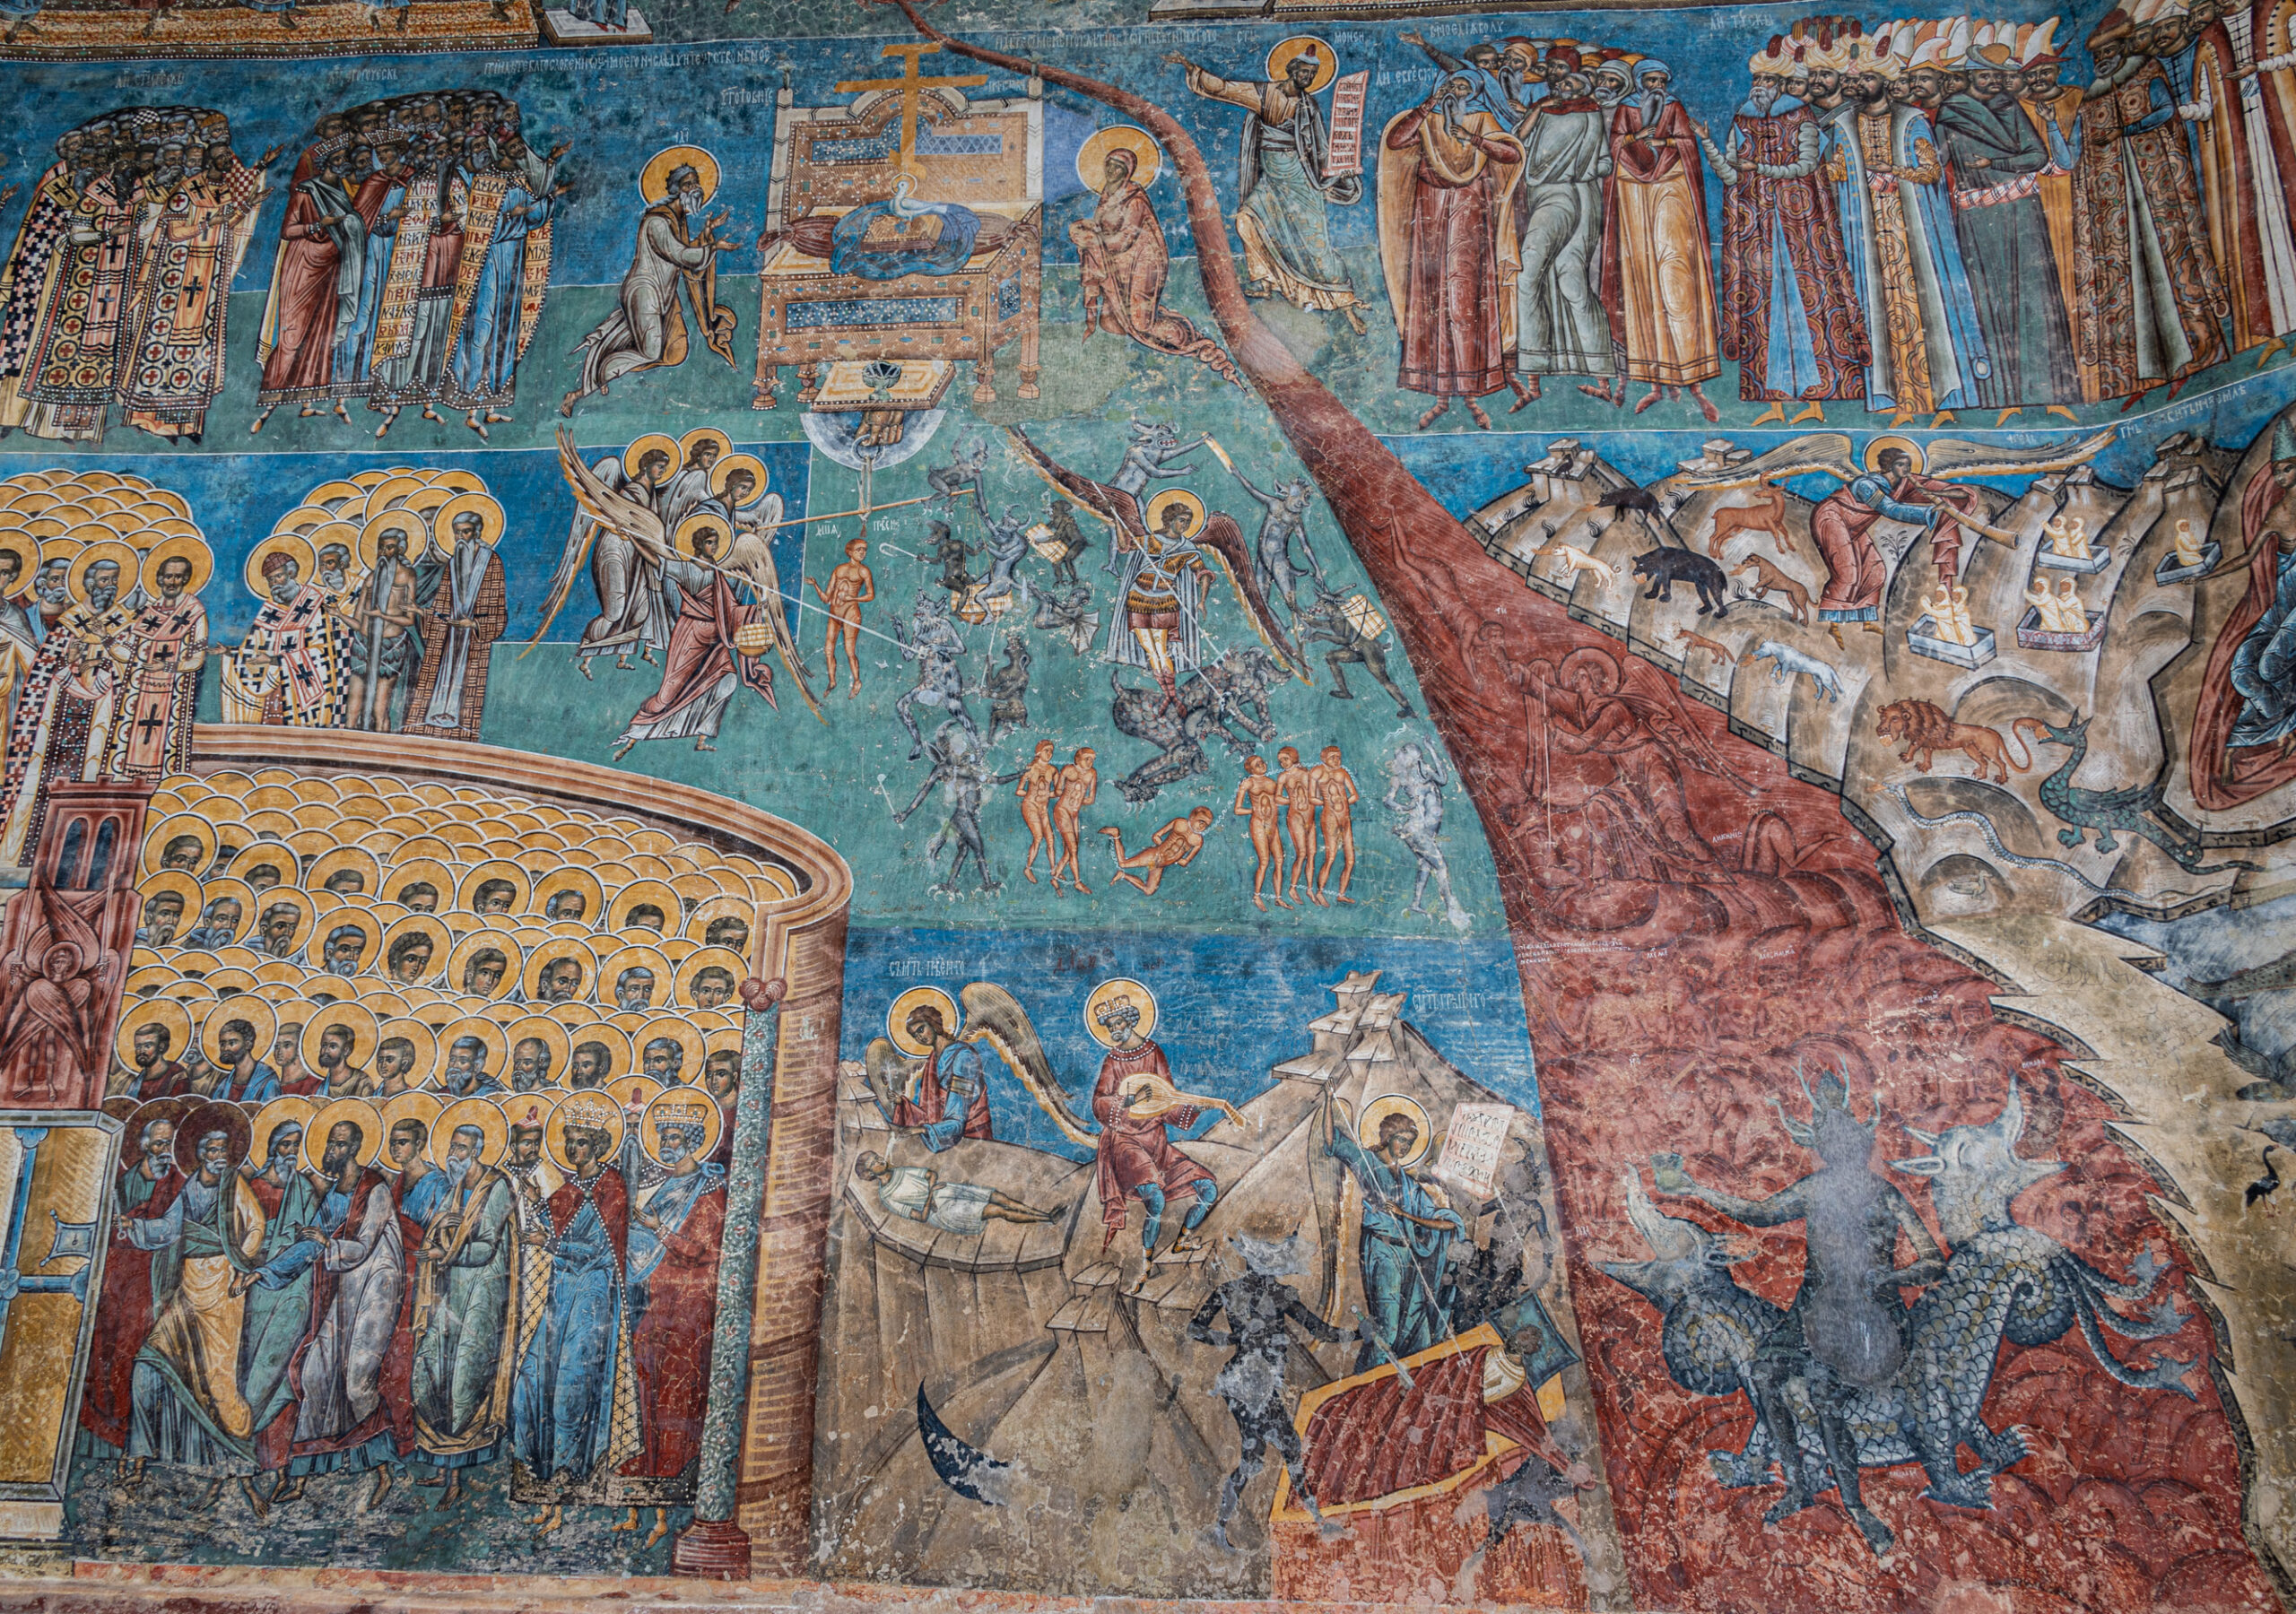 The Last Judgment on Voronet Monastery’s exterior walls graphically depicts this terminal life event